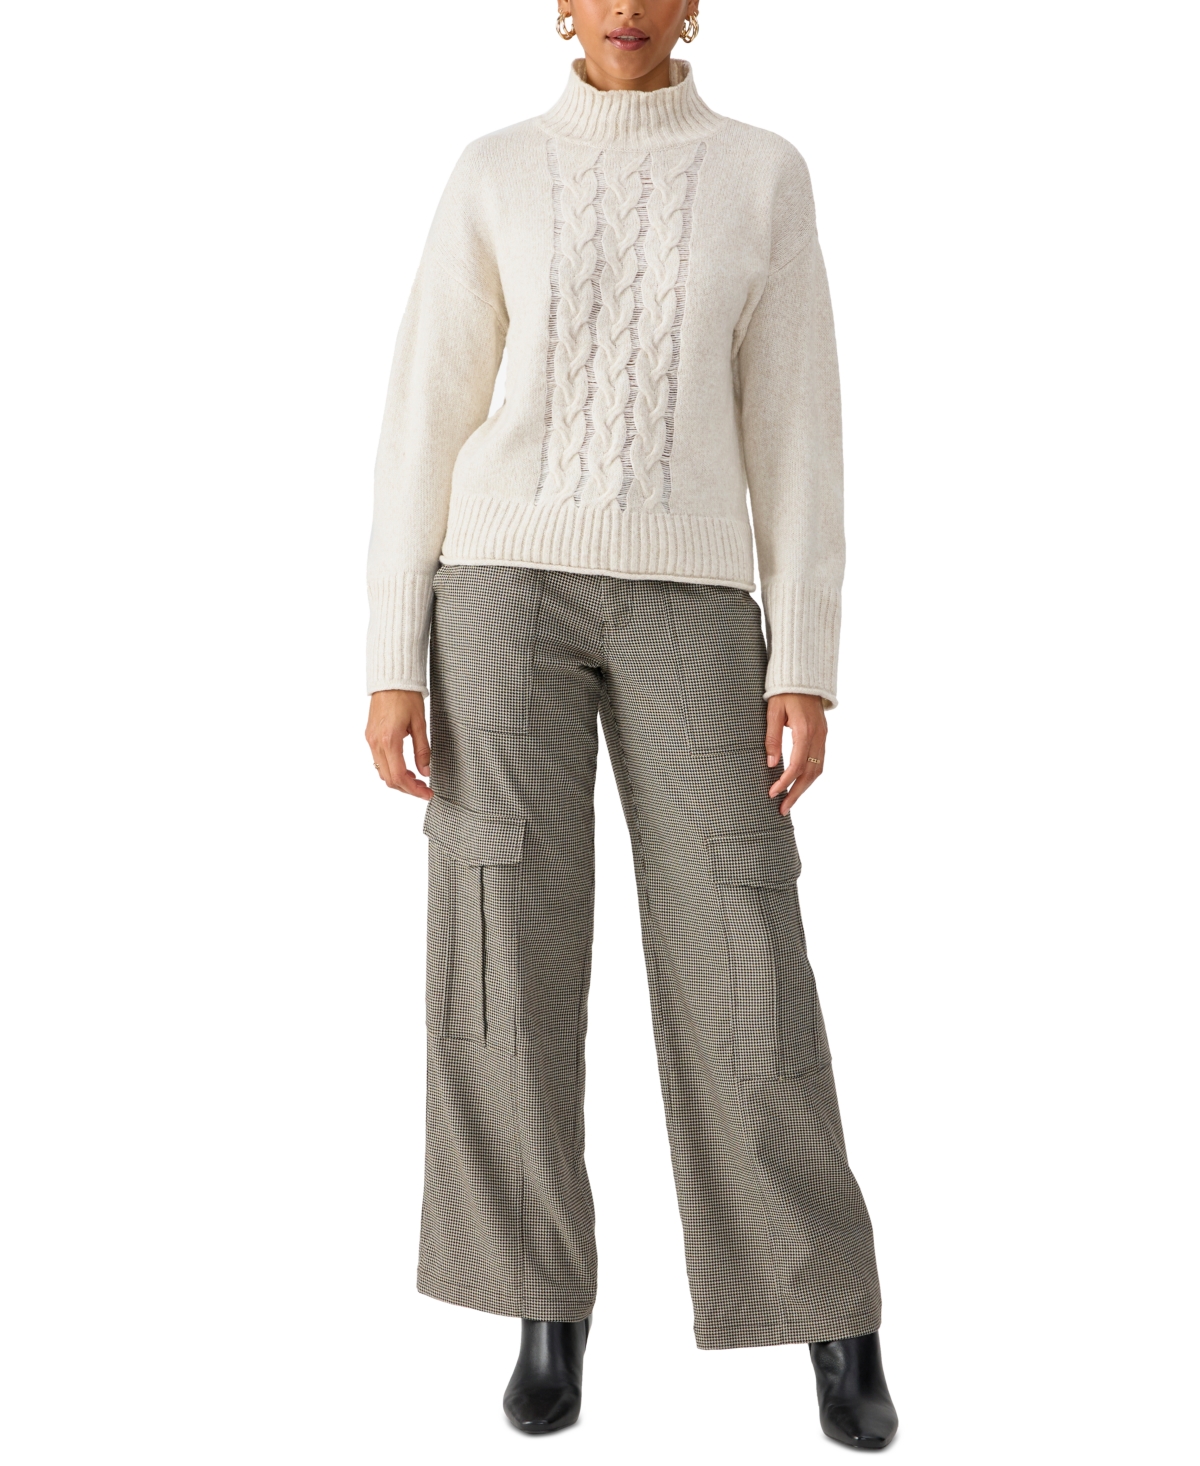 Women's Turtleneck Cable-Knit Sweater - Toasted Marshmellow